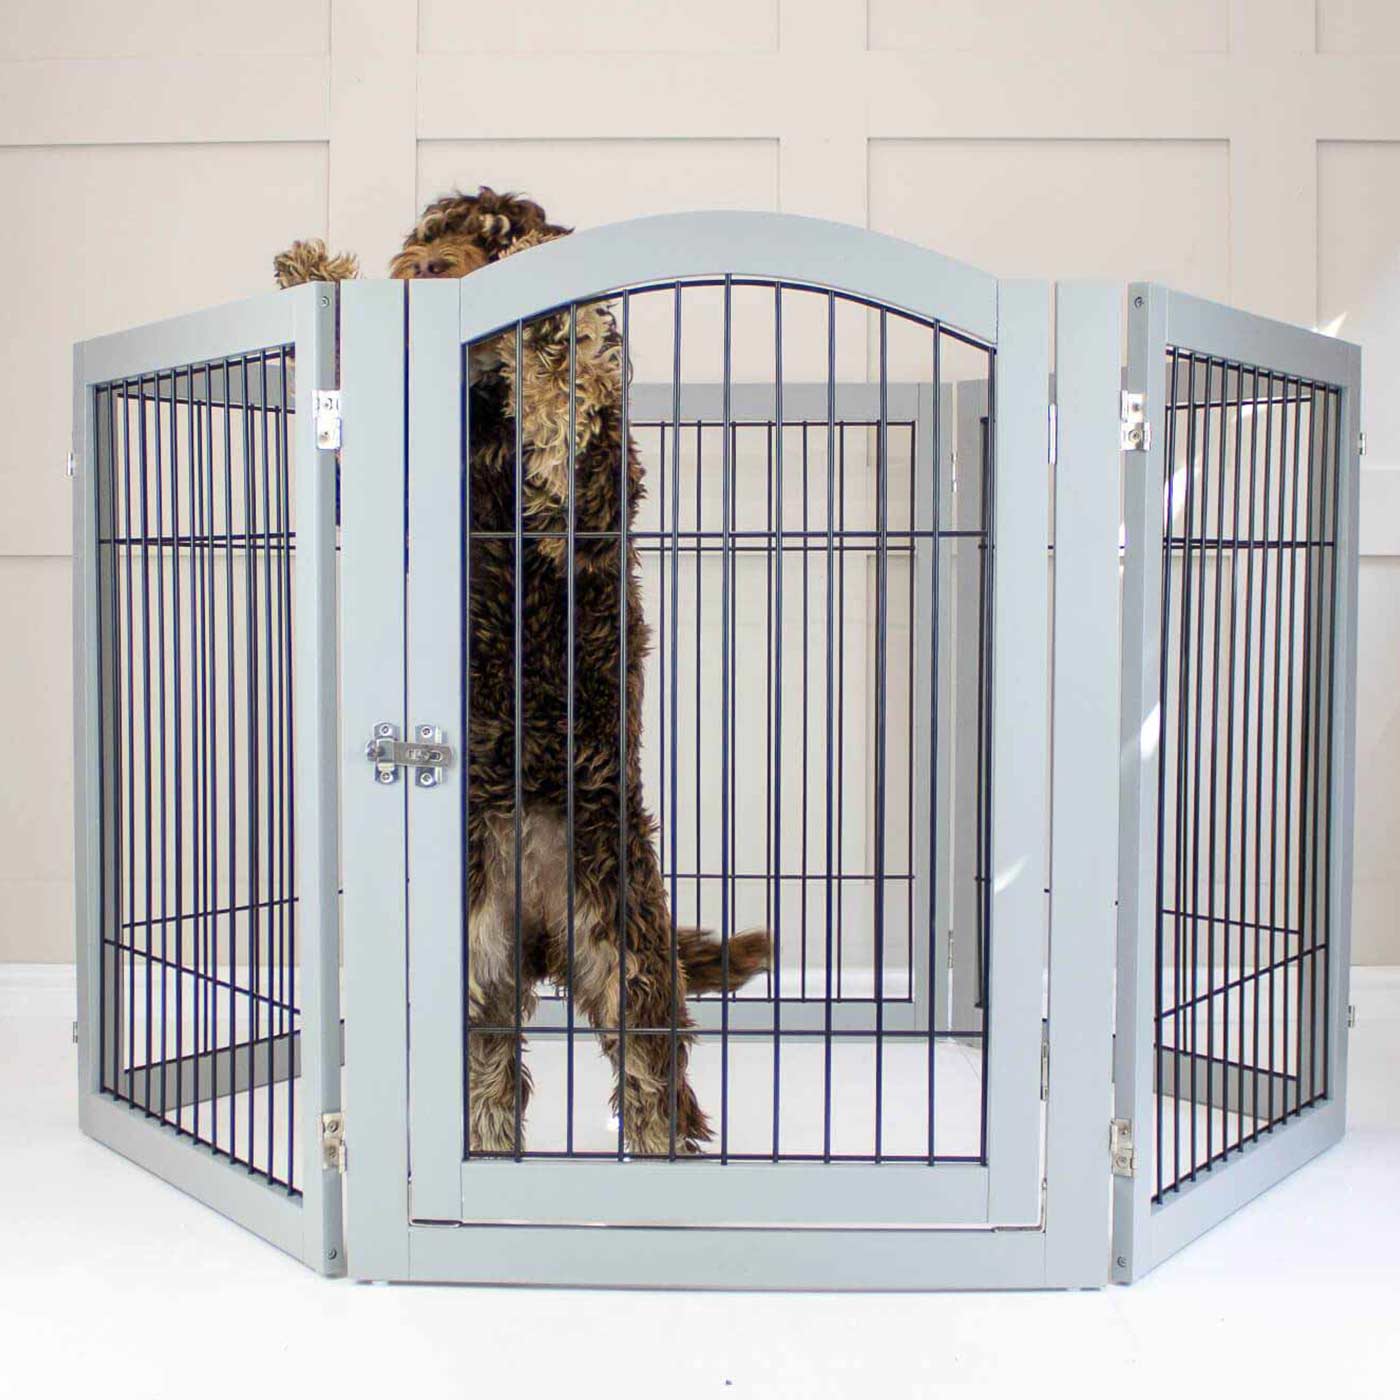 [color:grey] Ensure The Ultimate Puppy Safety with Our Heavy Duty Wooden Puppy Play Pen in Grey or white, Crafted to Take Your Pet Right Through Maturity! Powder Coated to Be Extra Hardwearing! 6 panels that are 80.5cm high! Available To Now at Lords & Labradors